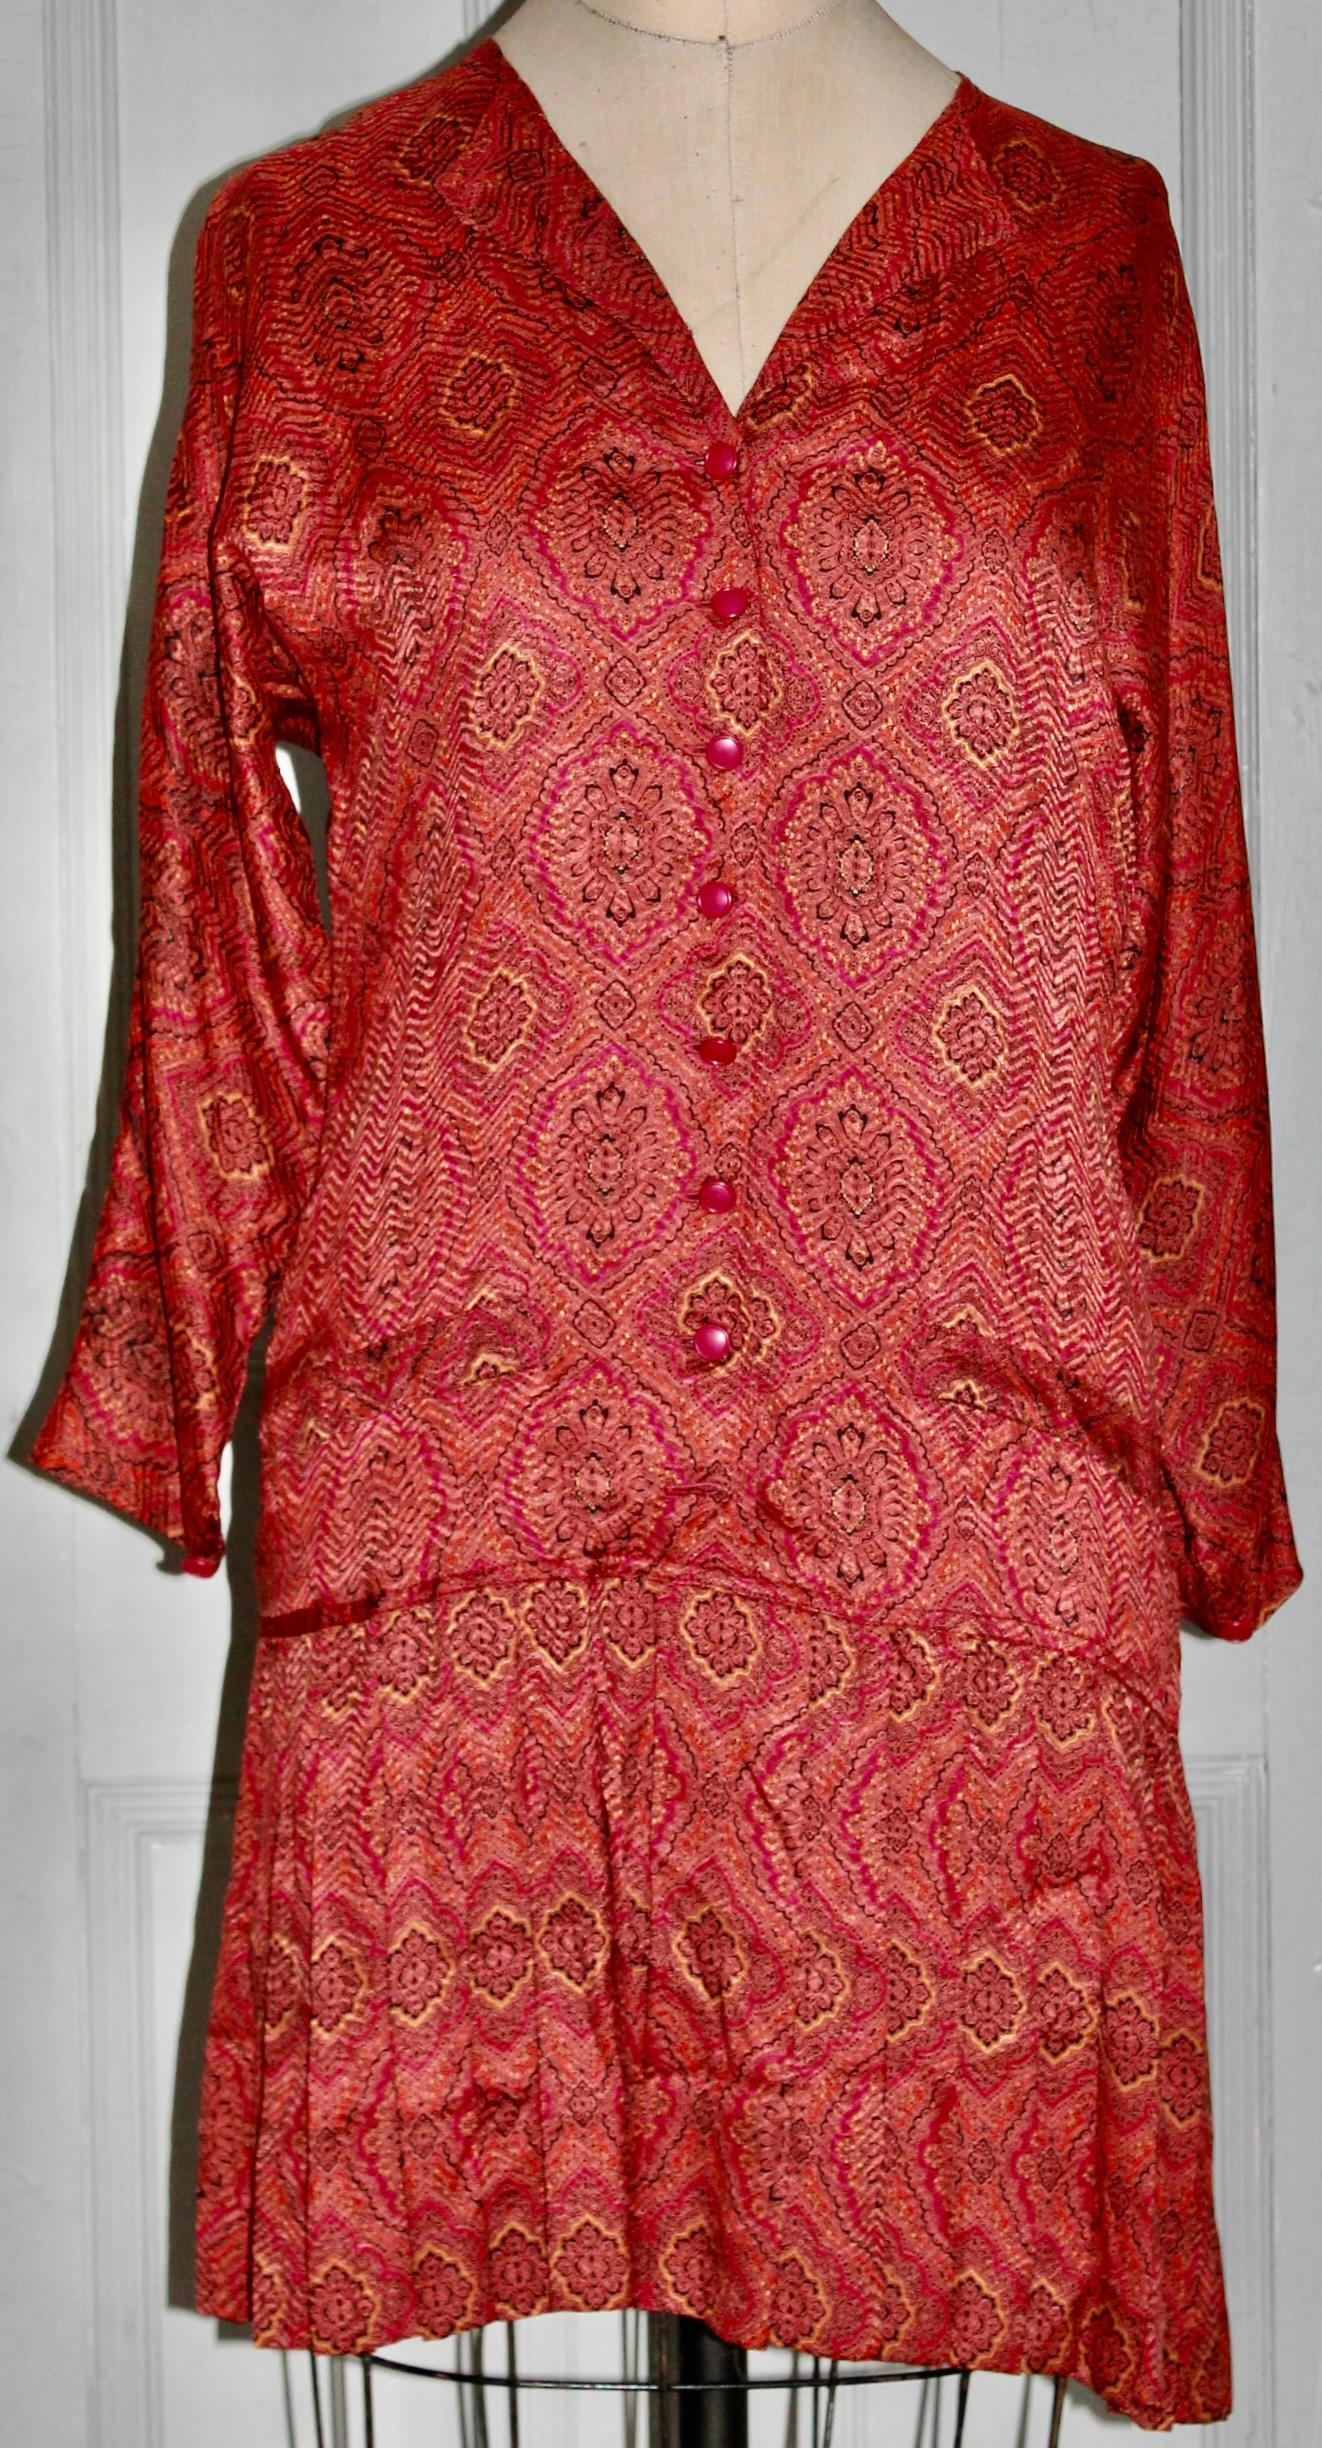 Offering a Jean-Louis Scherrer Paris Silk Day Dress. Paisley print, top lined in black silk,
buttoned up front, US size 8.  A numbered Paris label (408309).